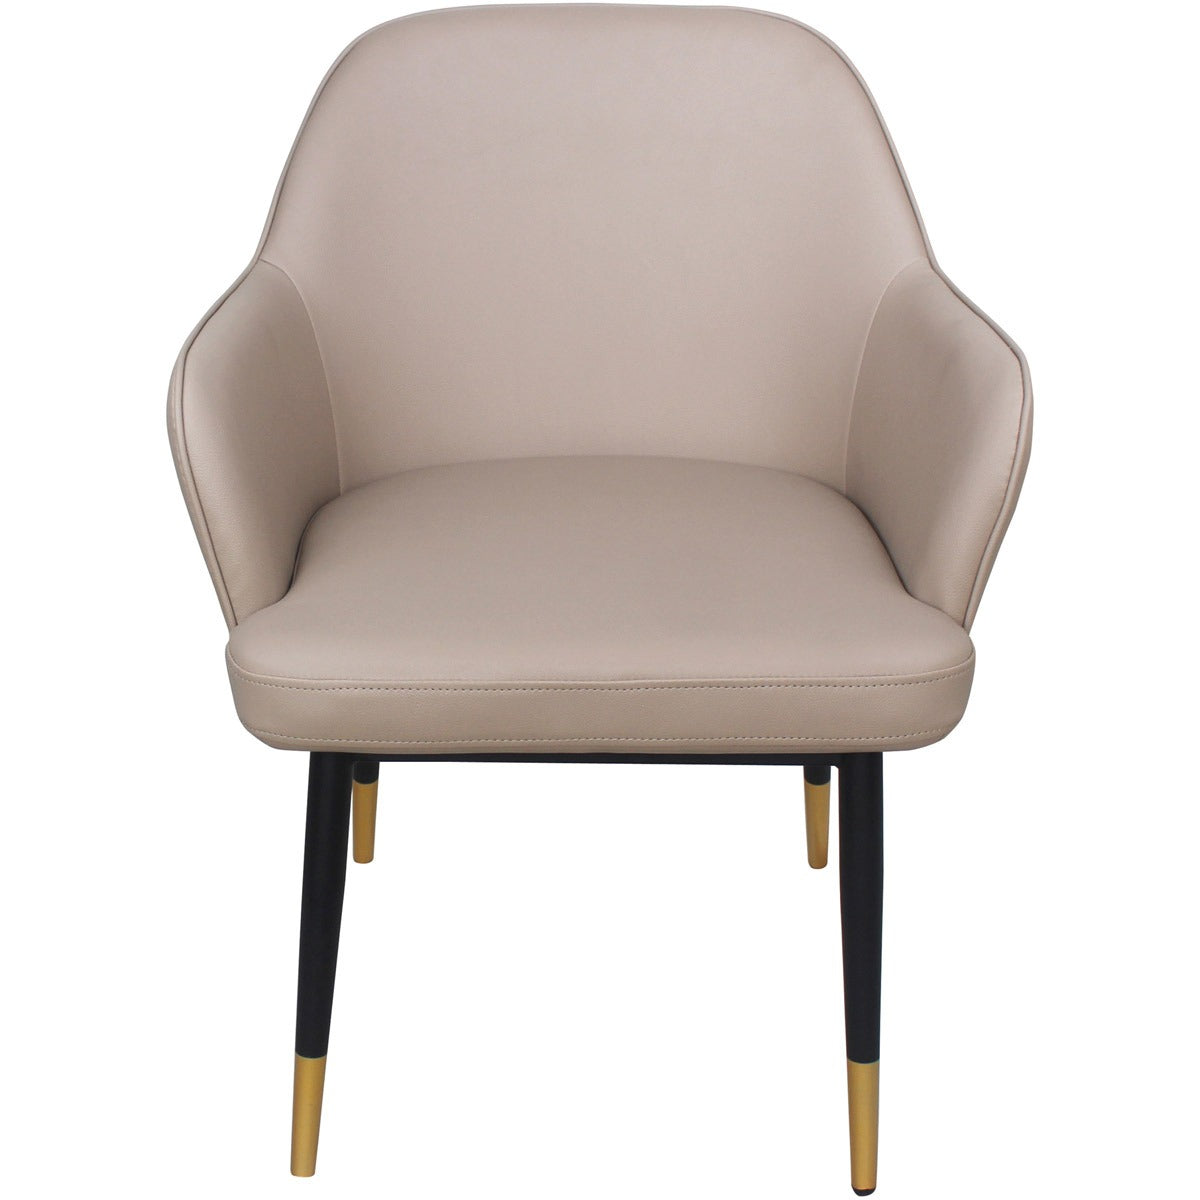 Moe's Home Collection Berlin Beige Accent Chair